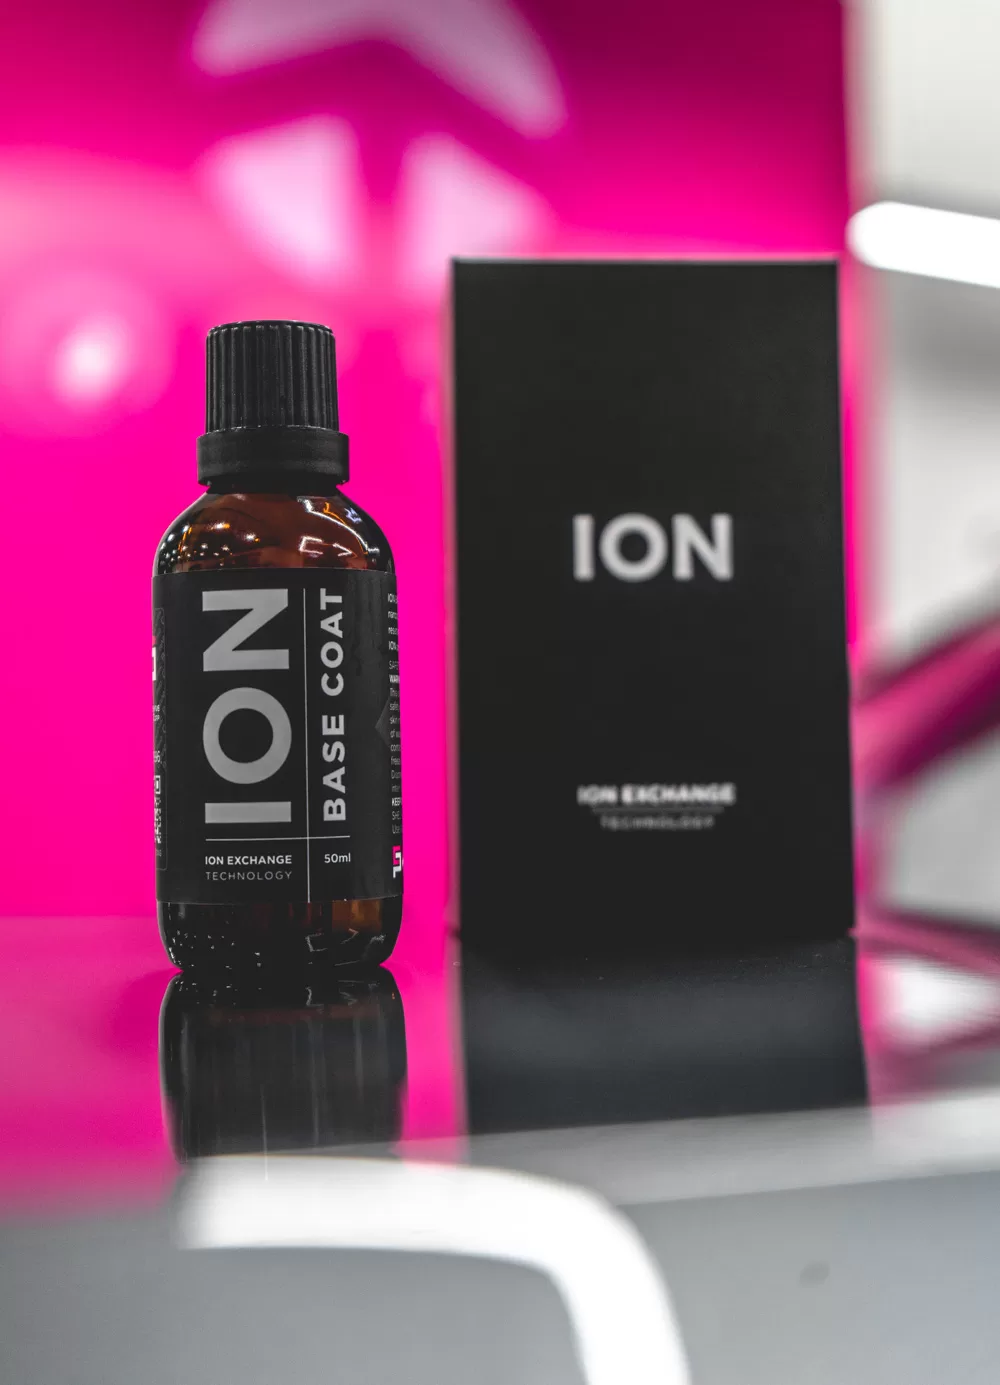 A bottle of ion base coat next to its box.